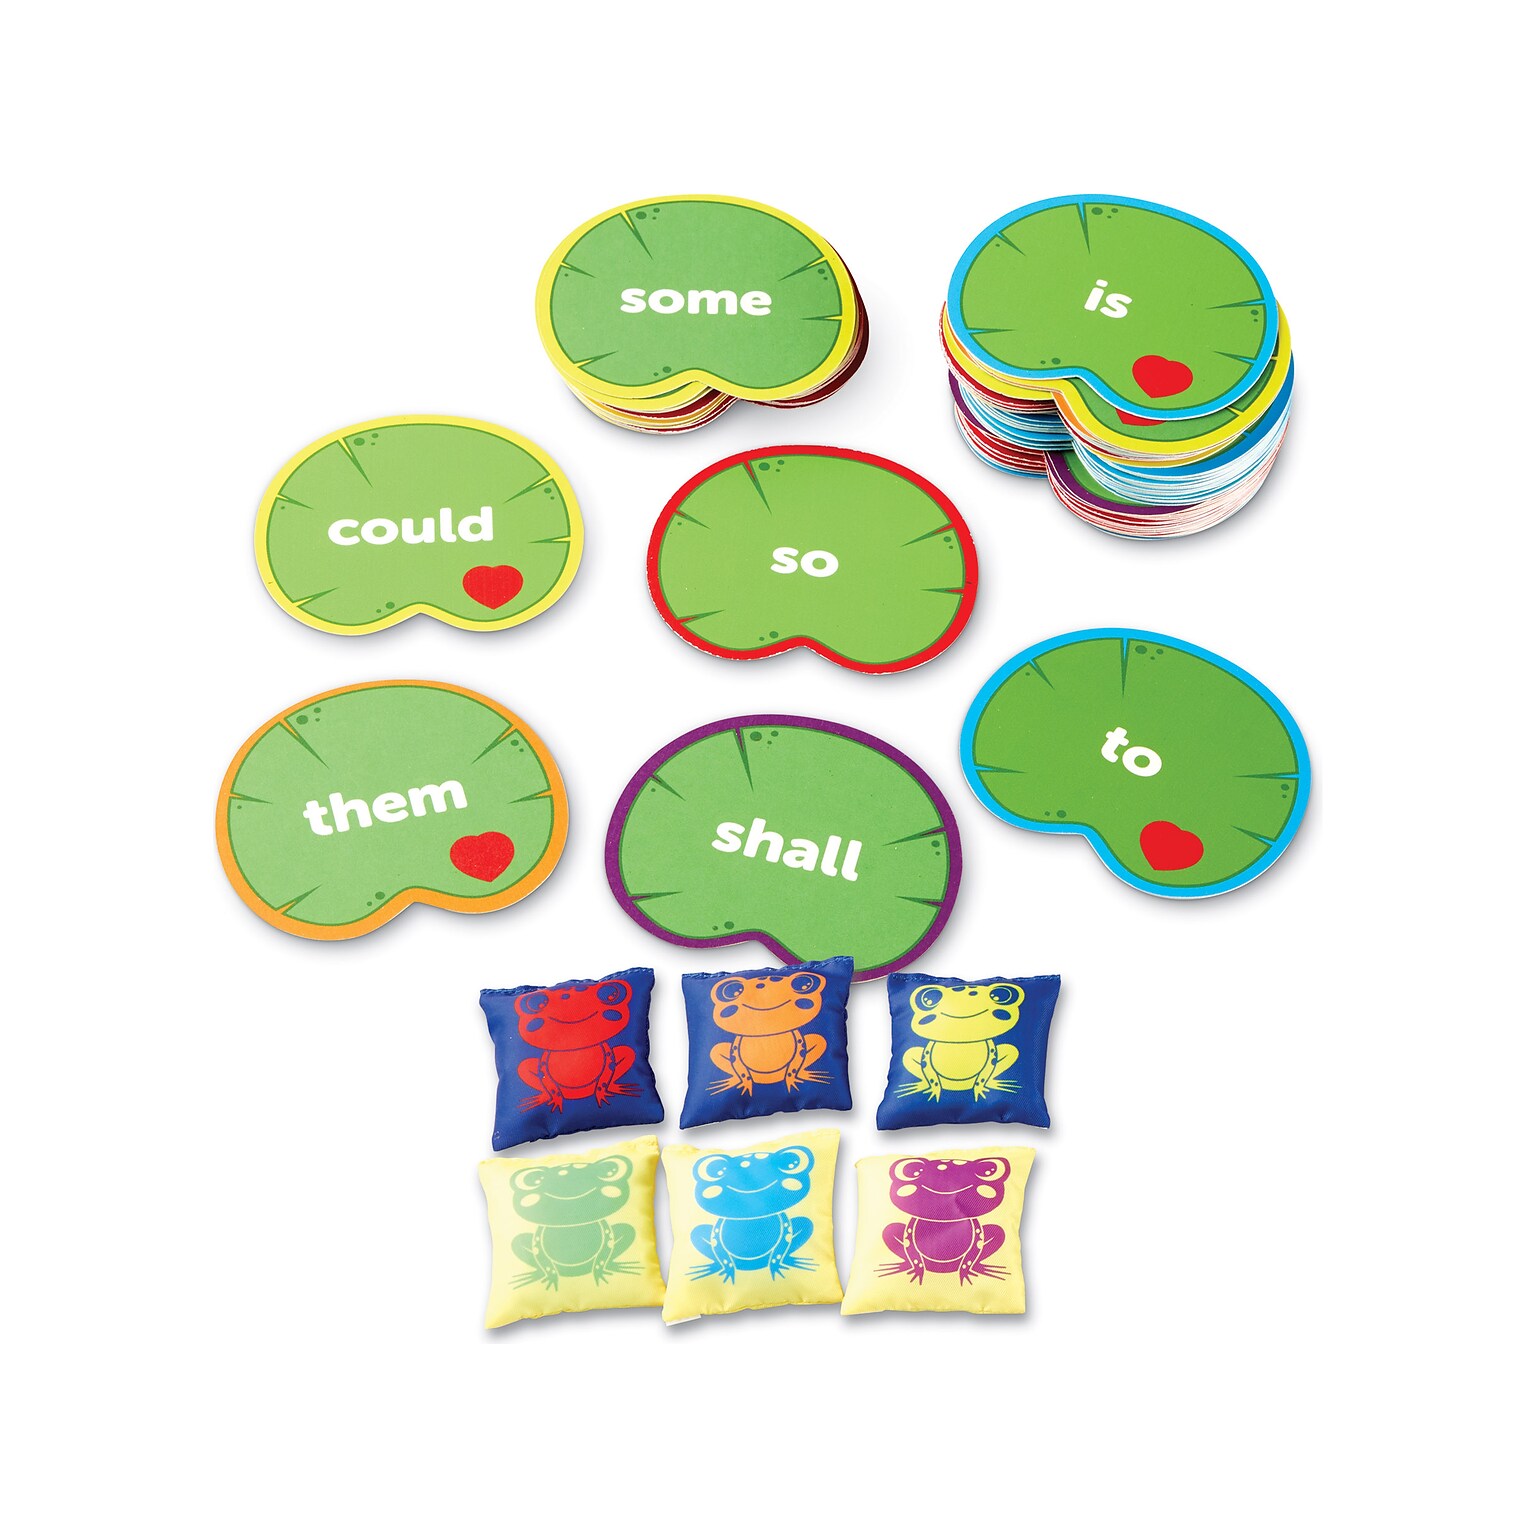 Learning Resources Sight Word Toss Game (LER4698)